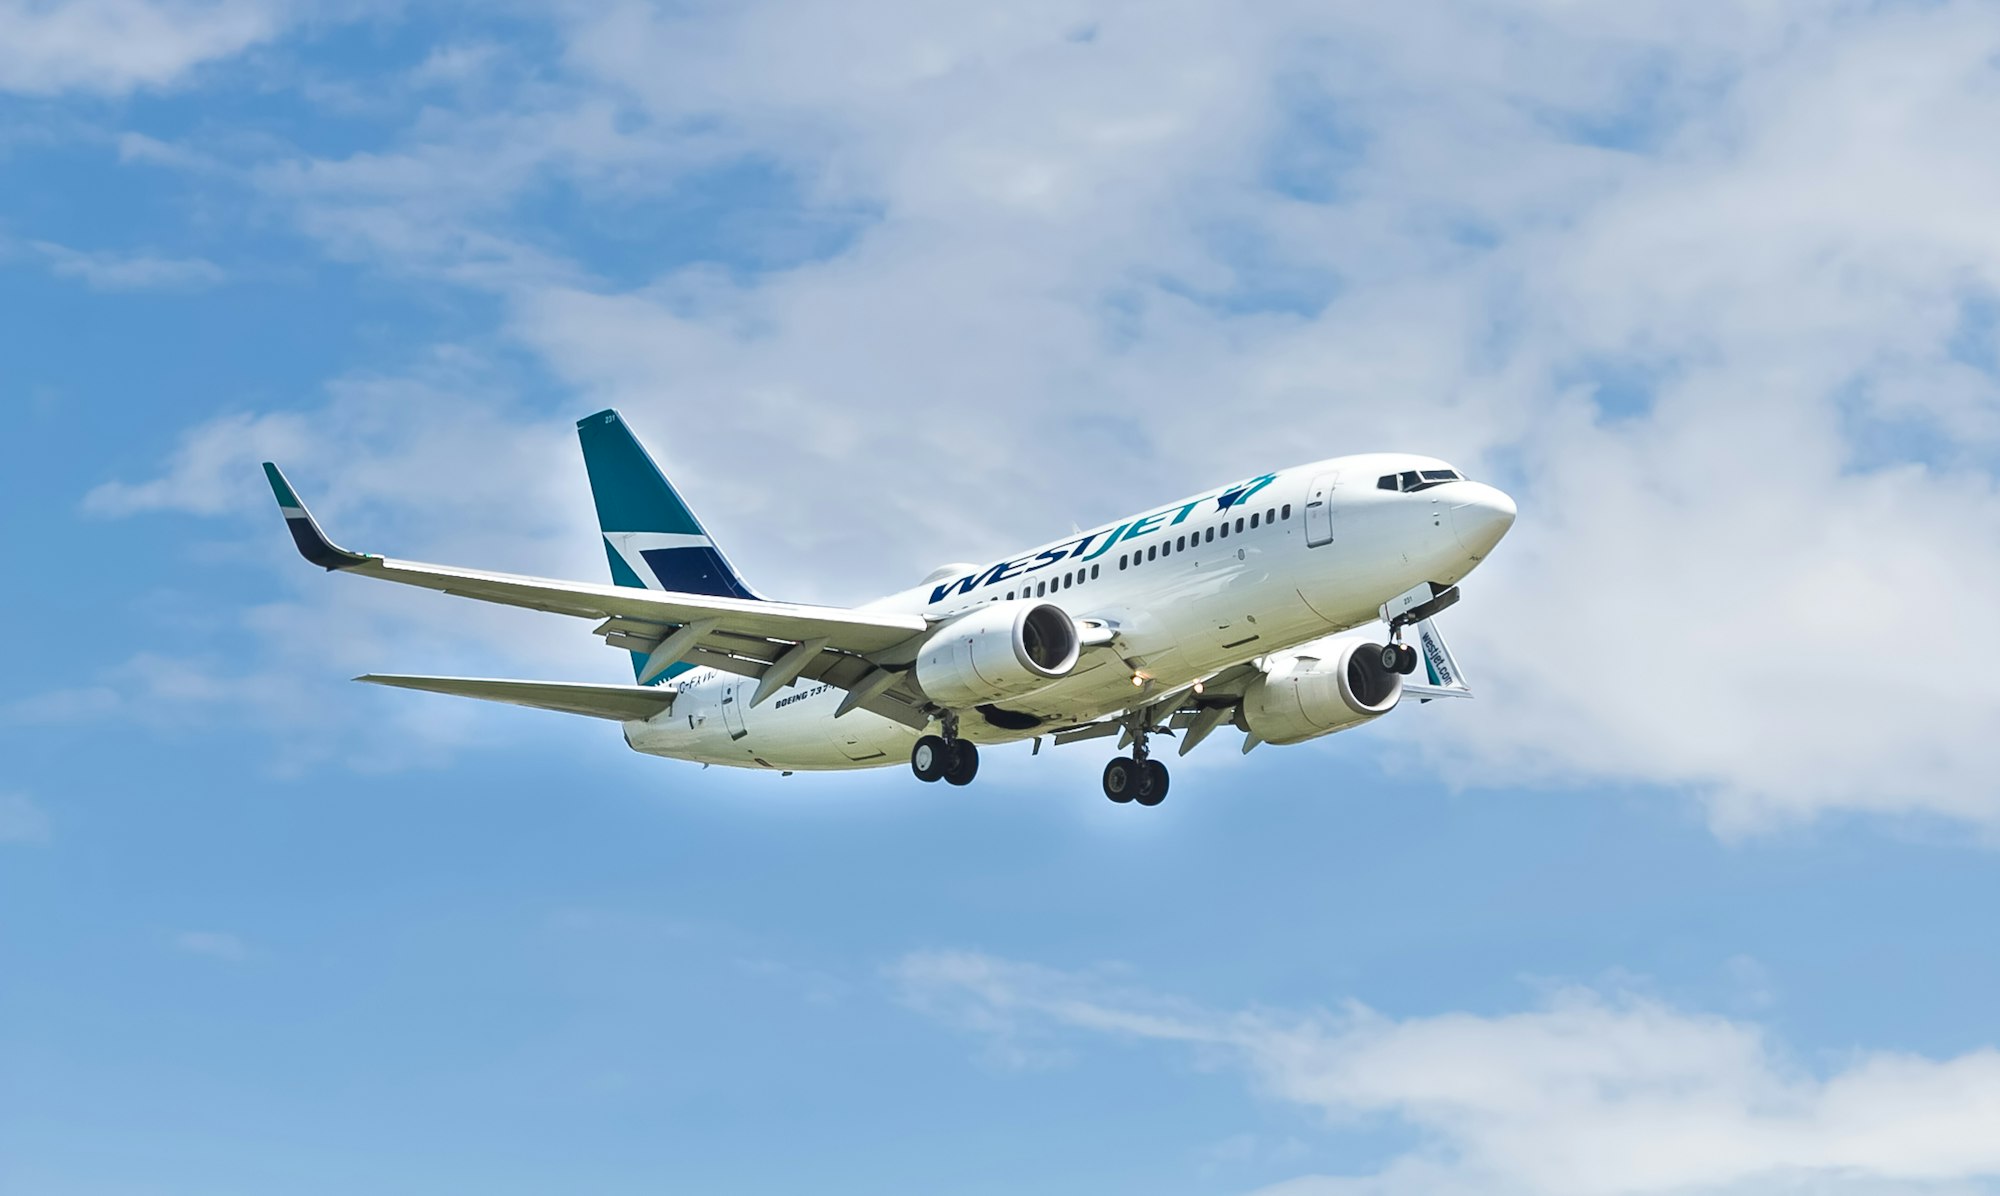 WestJet's Strategic Move: Leasing Boeing 737 MAX 8 Aircraft for Fleet Expansion